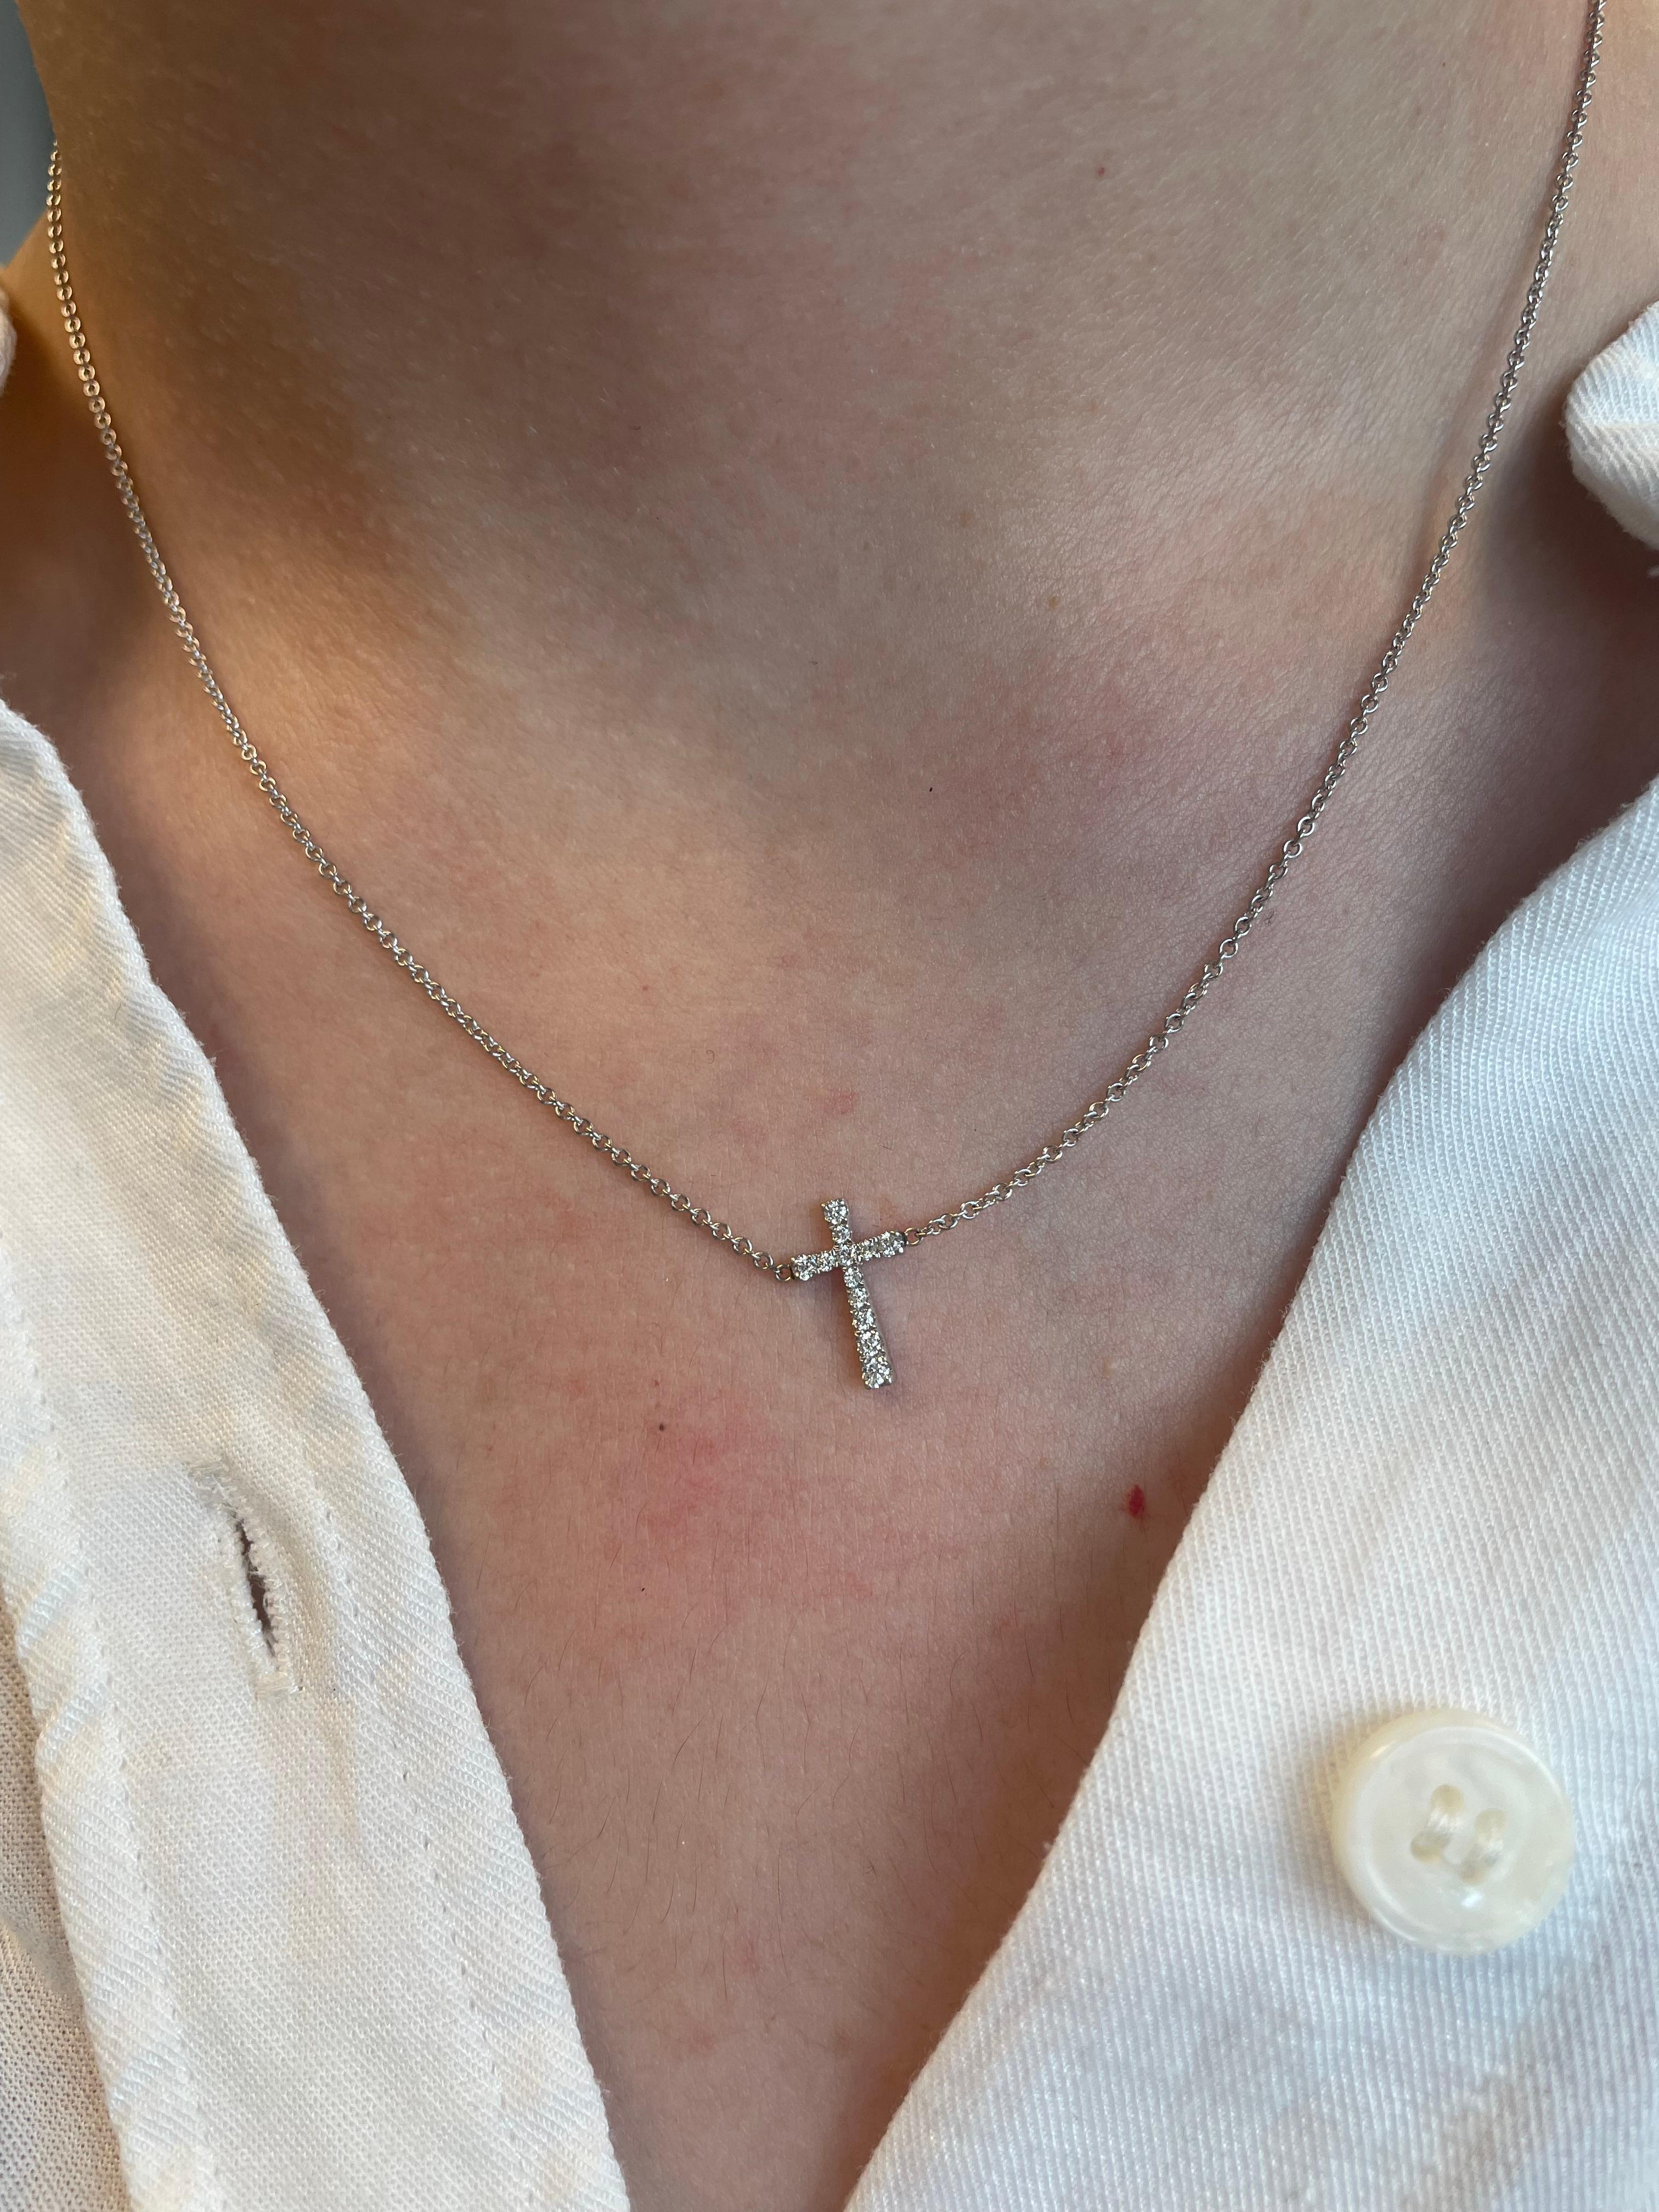 Beautiful diamond cross pendant necklace, made in Italy.
12 round brilliant diamonds, approximately 0.20 carats. Approximately H/I color and VS clarity. 18k white gold. 
Accommodated with an up-to-date appraisal by a GIA G.G. once purchased, upon